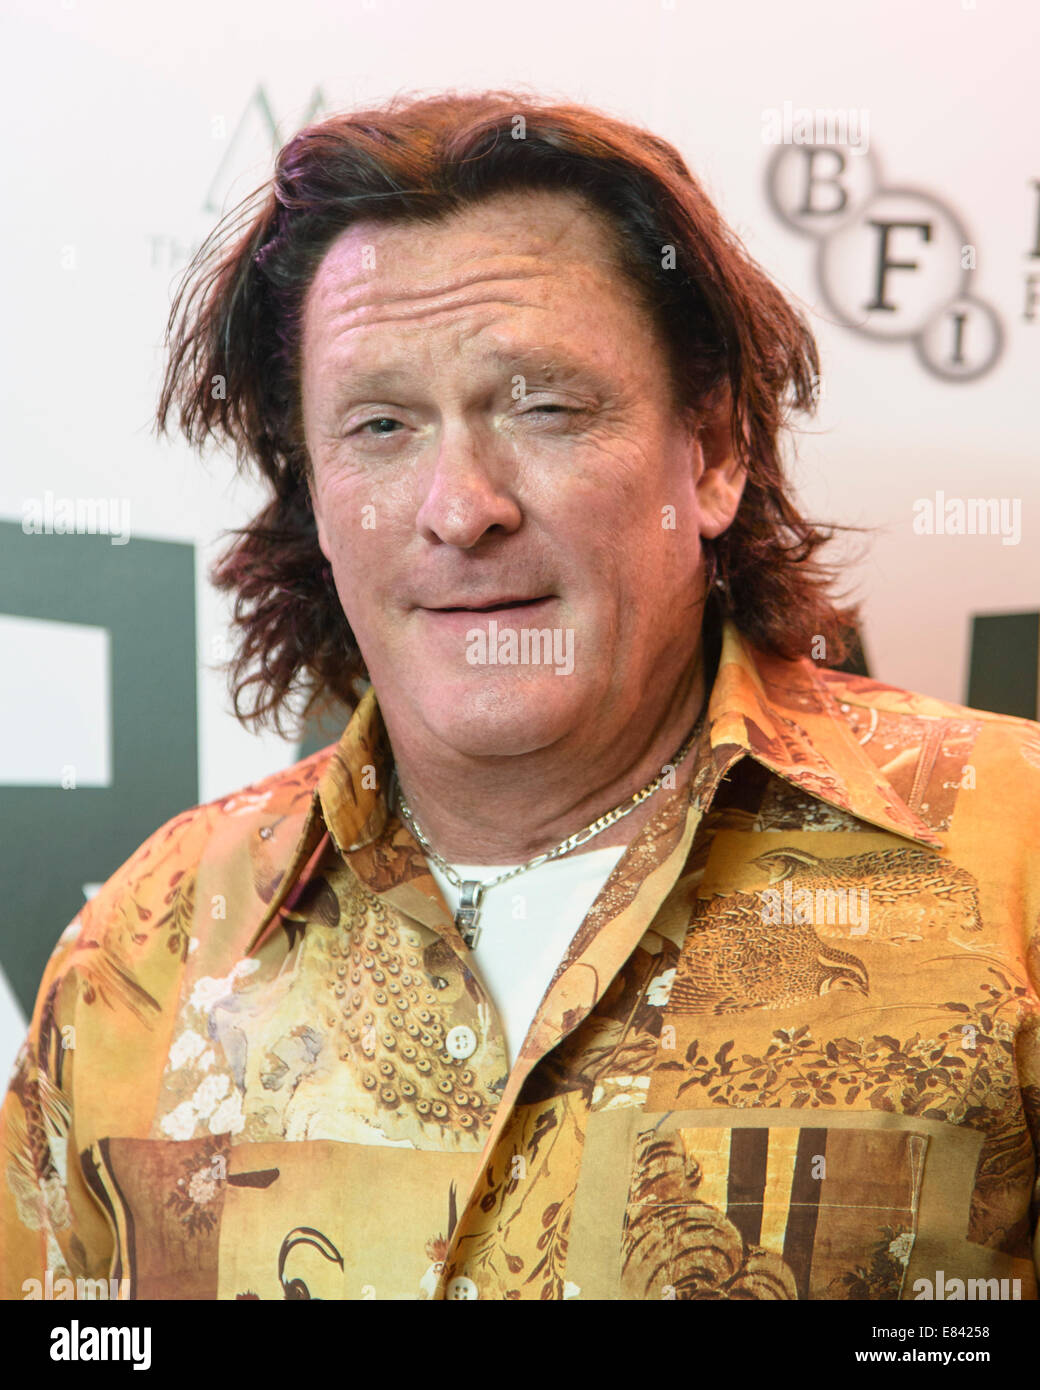 Cast and Crew attends the European premiere of THE NINTH CLOUD at Raindance Film Festival on 29/09/2014 at The Vue Piccadilly, London. Persons pictured: Michael Madsen. Picture by Julie Edwards Stock Photo